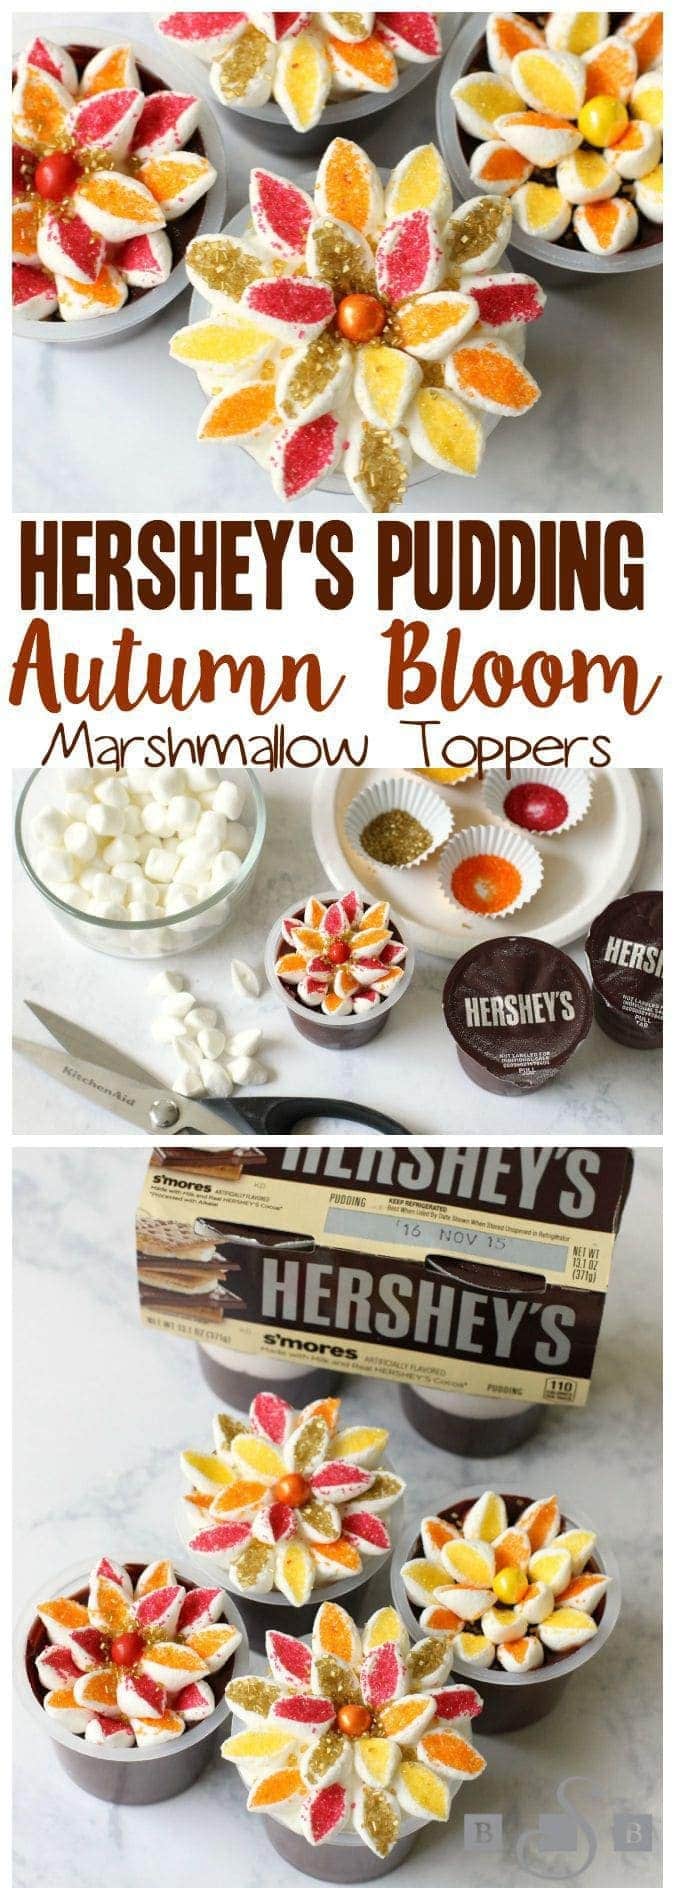 HERSHEY’S PUDDING AUTUMN BLOOM TOPPERS